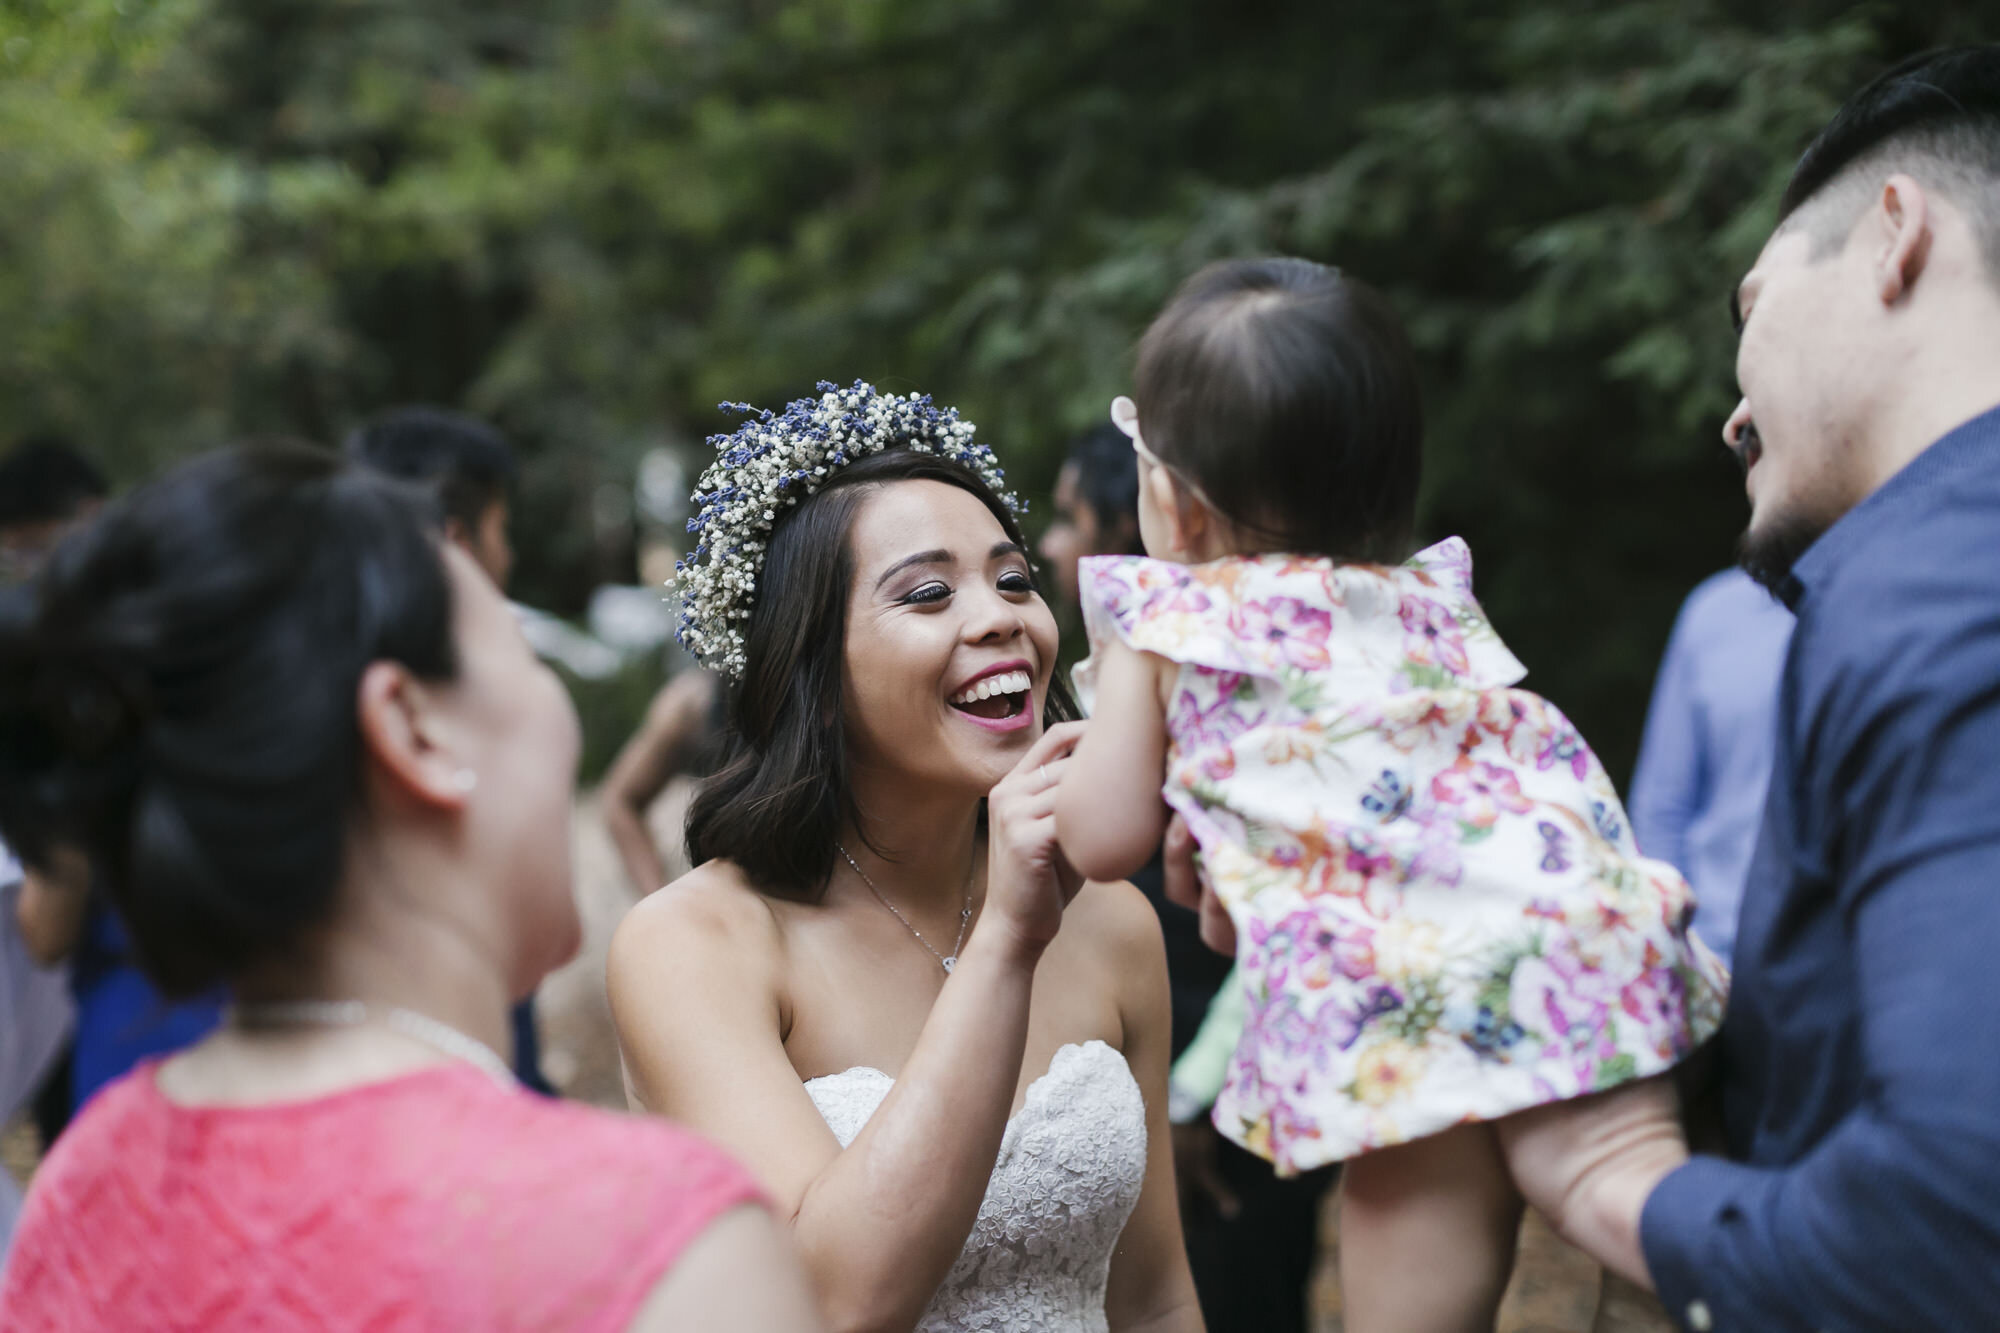 Bride dances with baby during outdoor wedding reception in a redwood forest